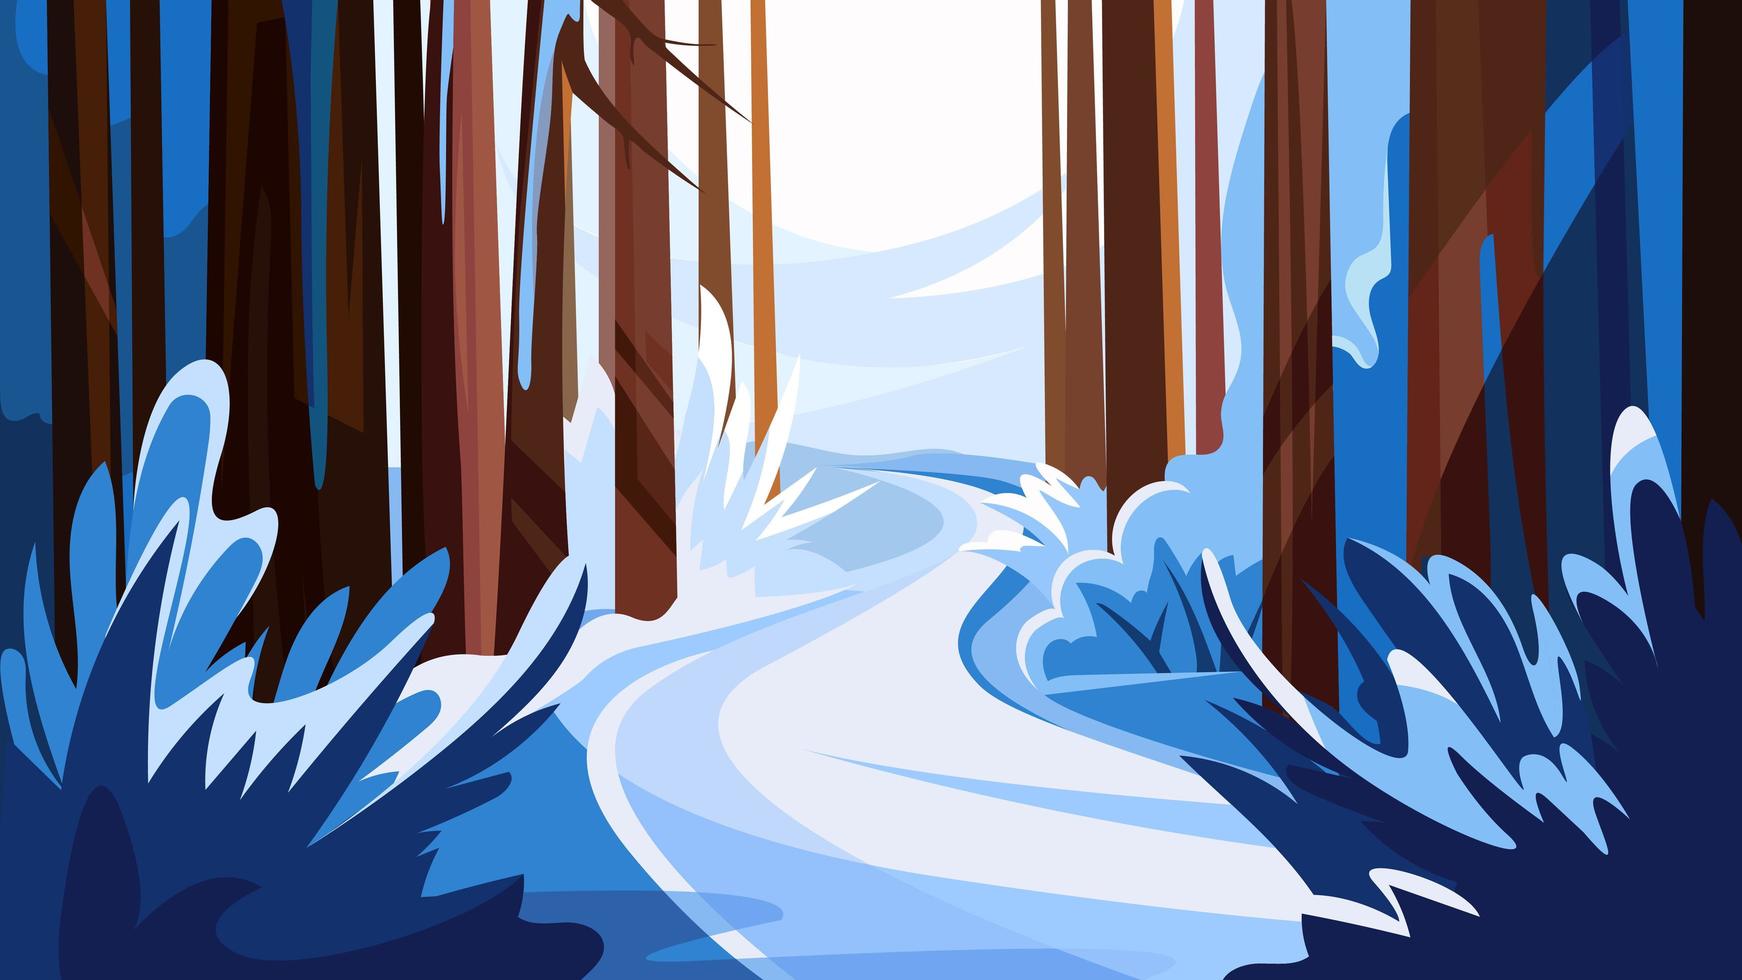 Road in winter forest. vector